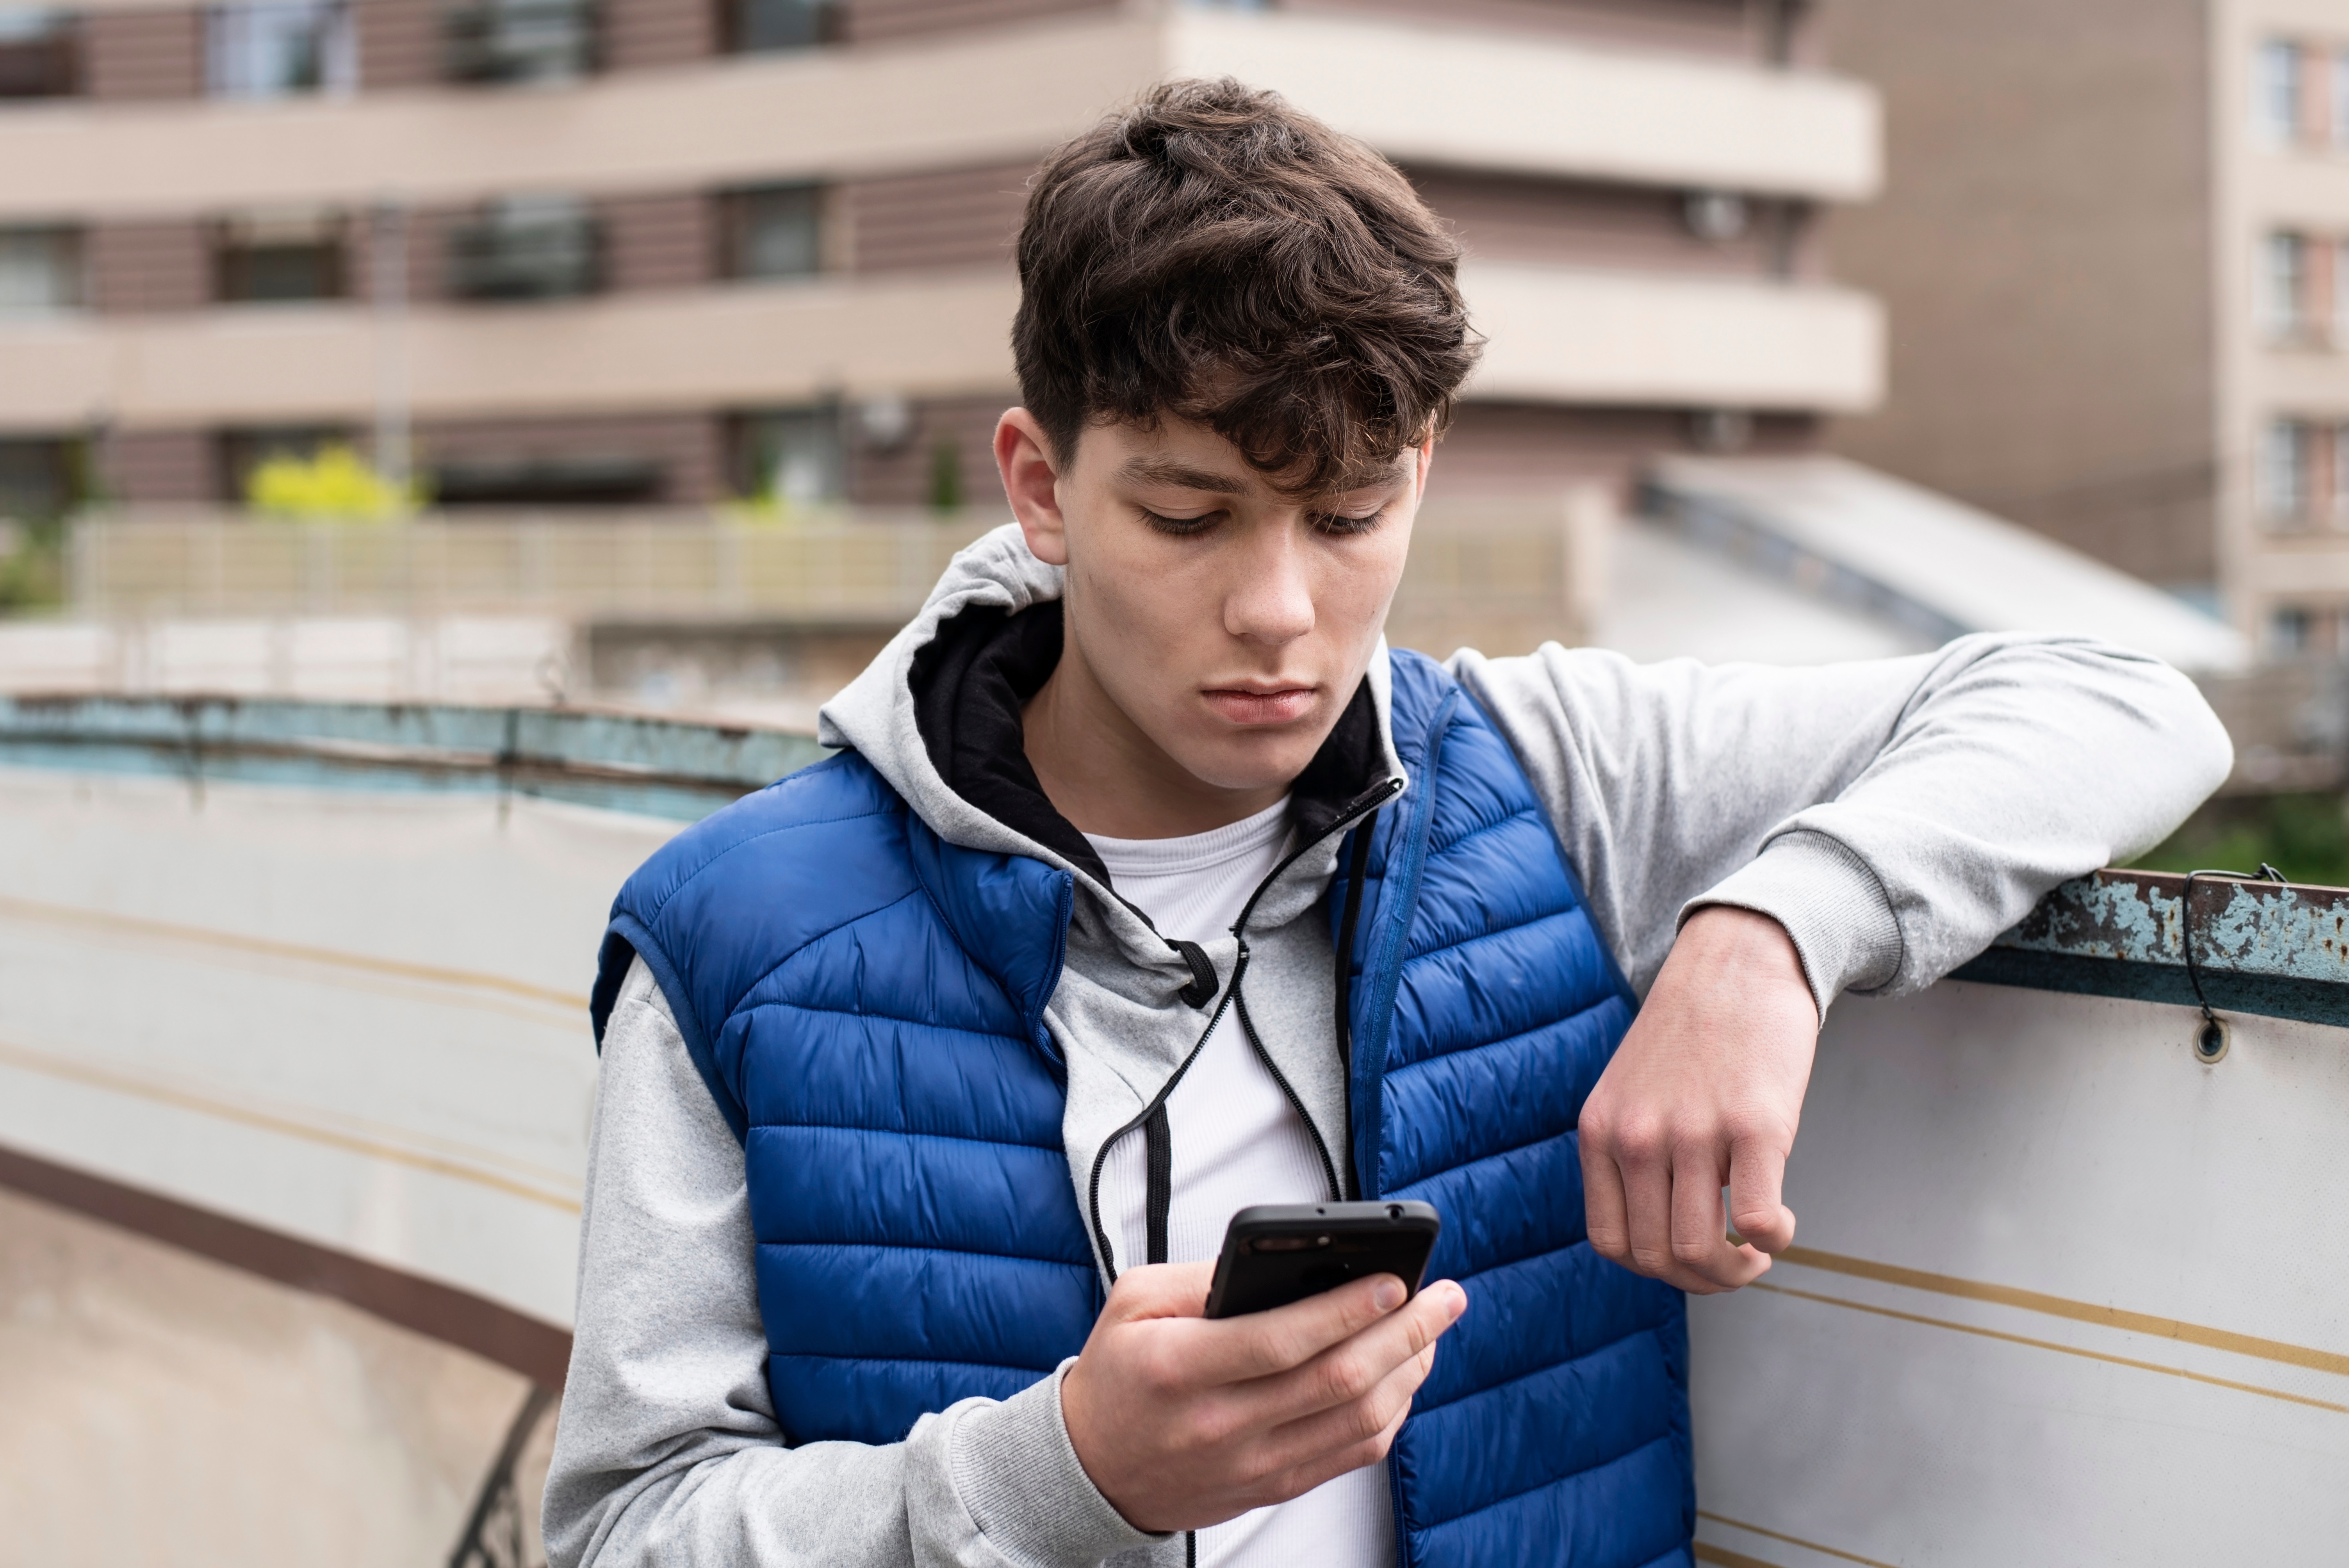 A teen boy looking into his phone | Source: Shutterstock